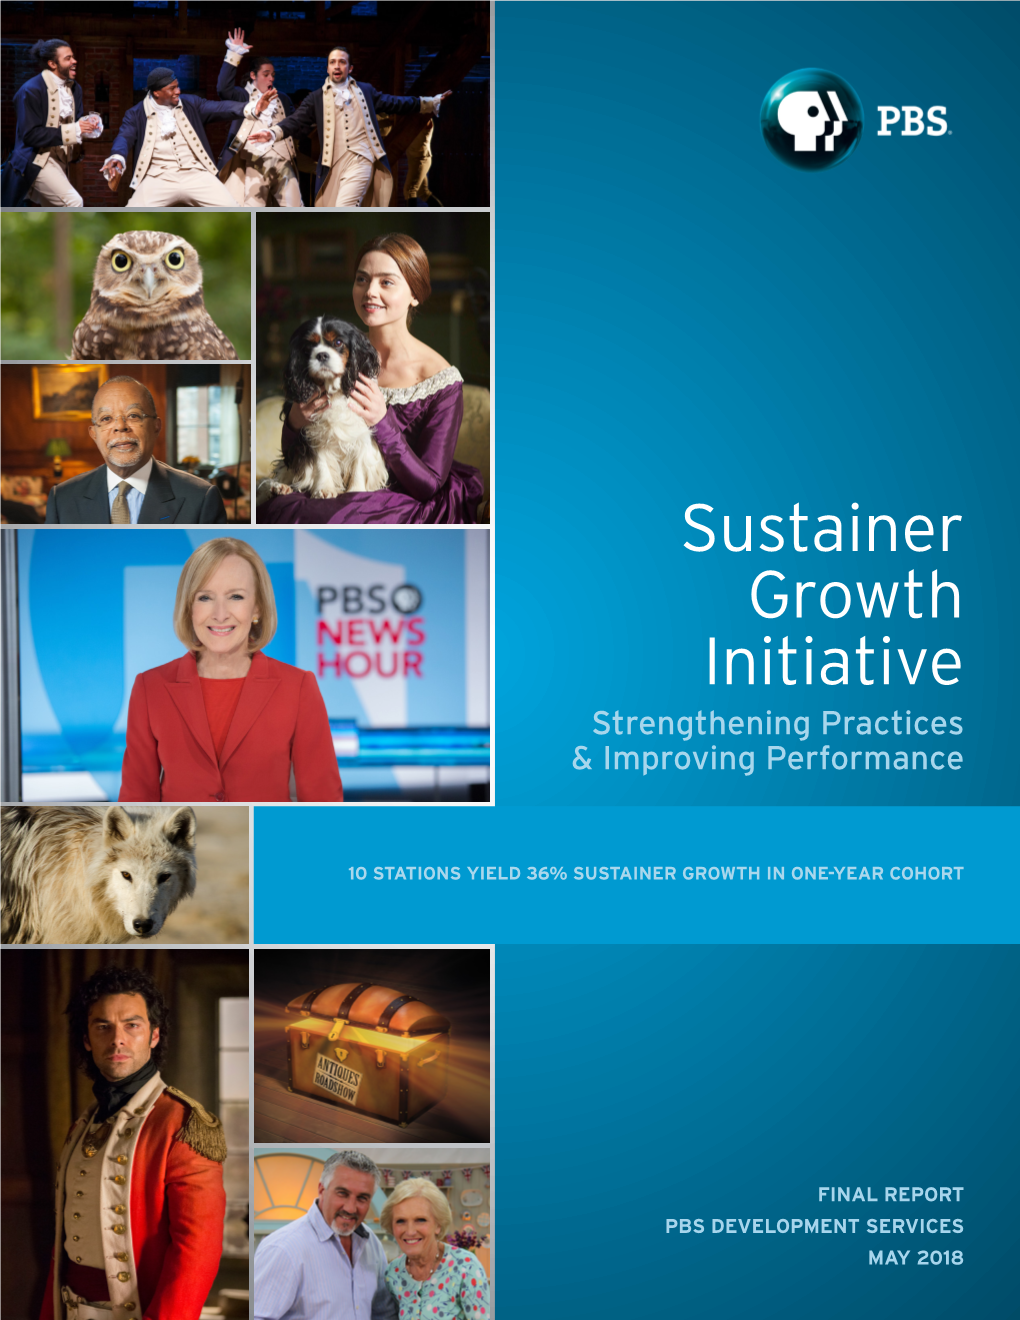 Sustainer Growth Initiative Strengthening Practices & Improving Performance